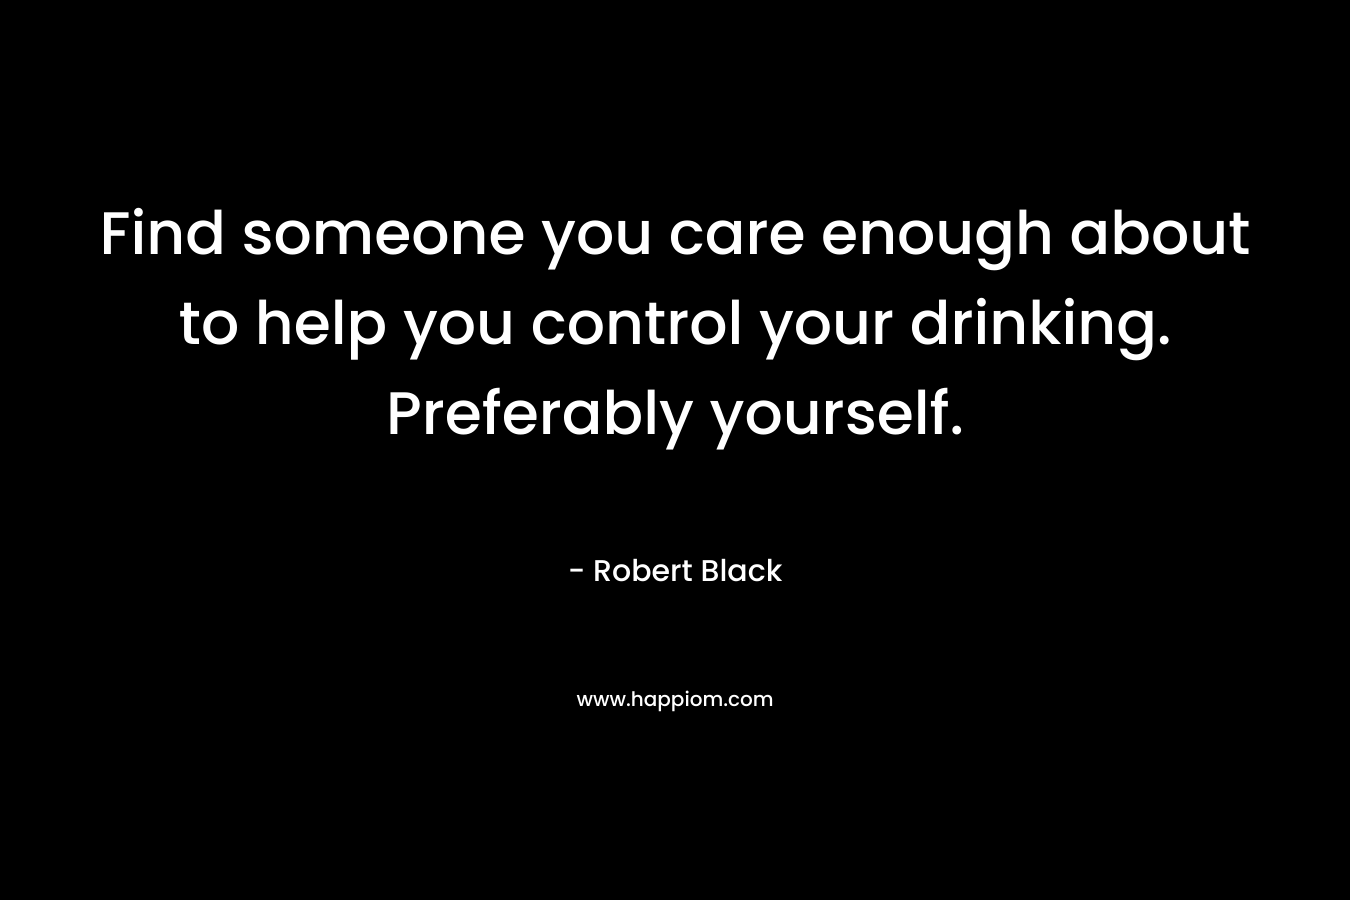 Find someone you care enough about to help you control your drinking. Preferably yourself.